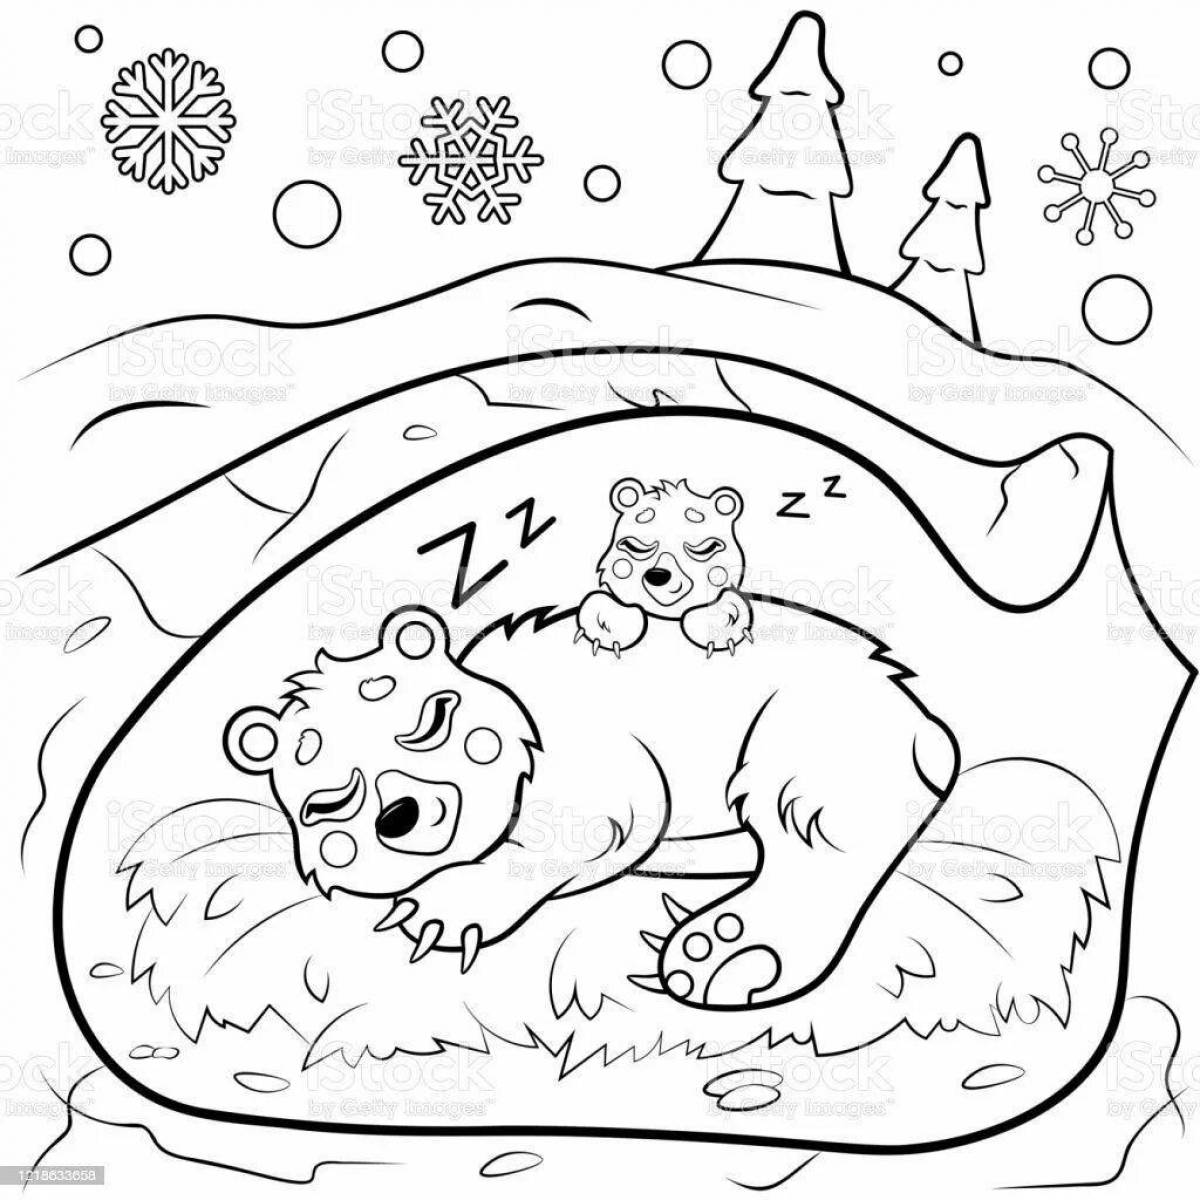 Adorable bear cub in the den coloring book for kids